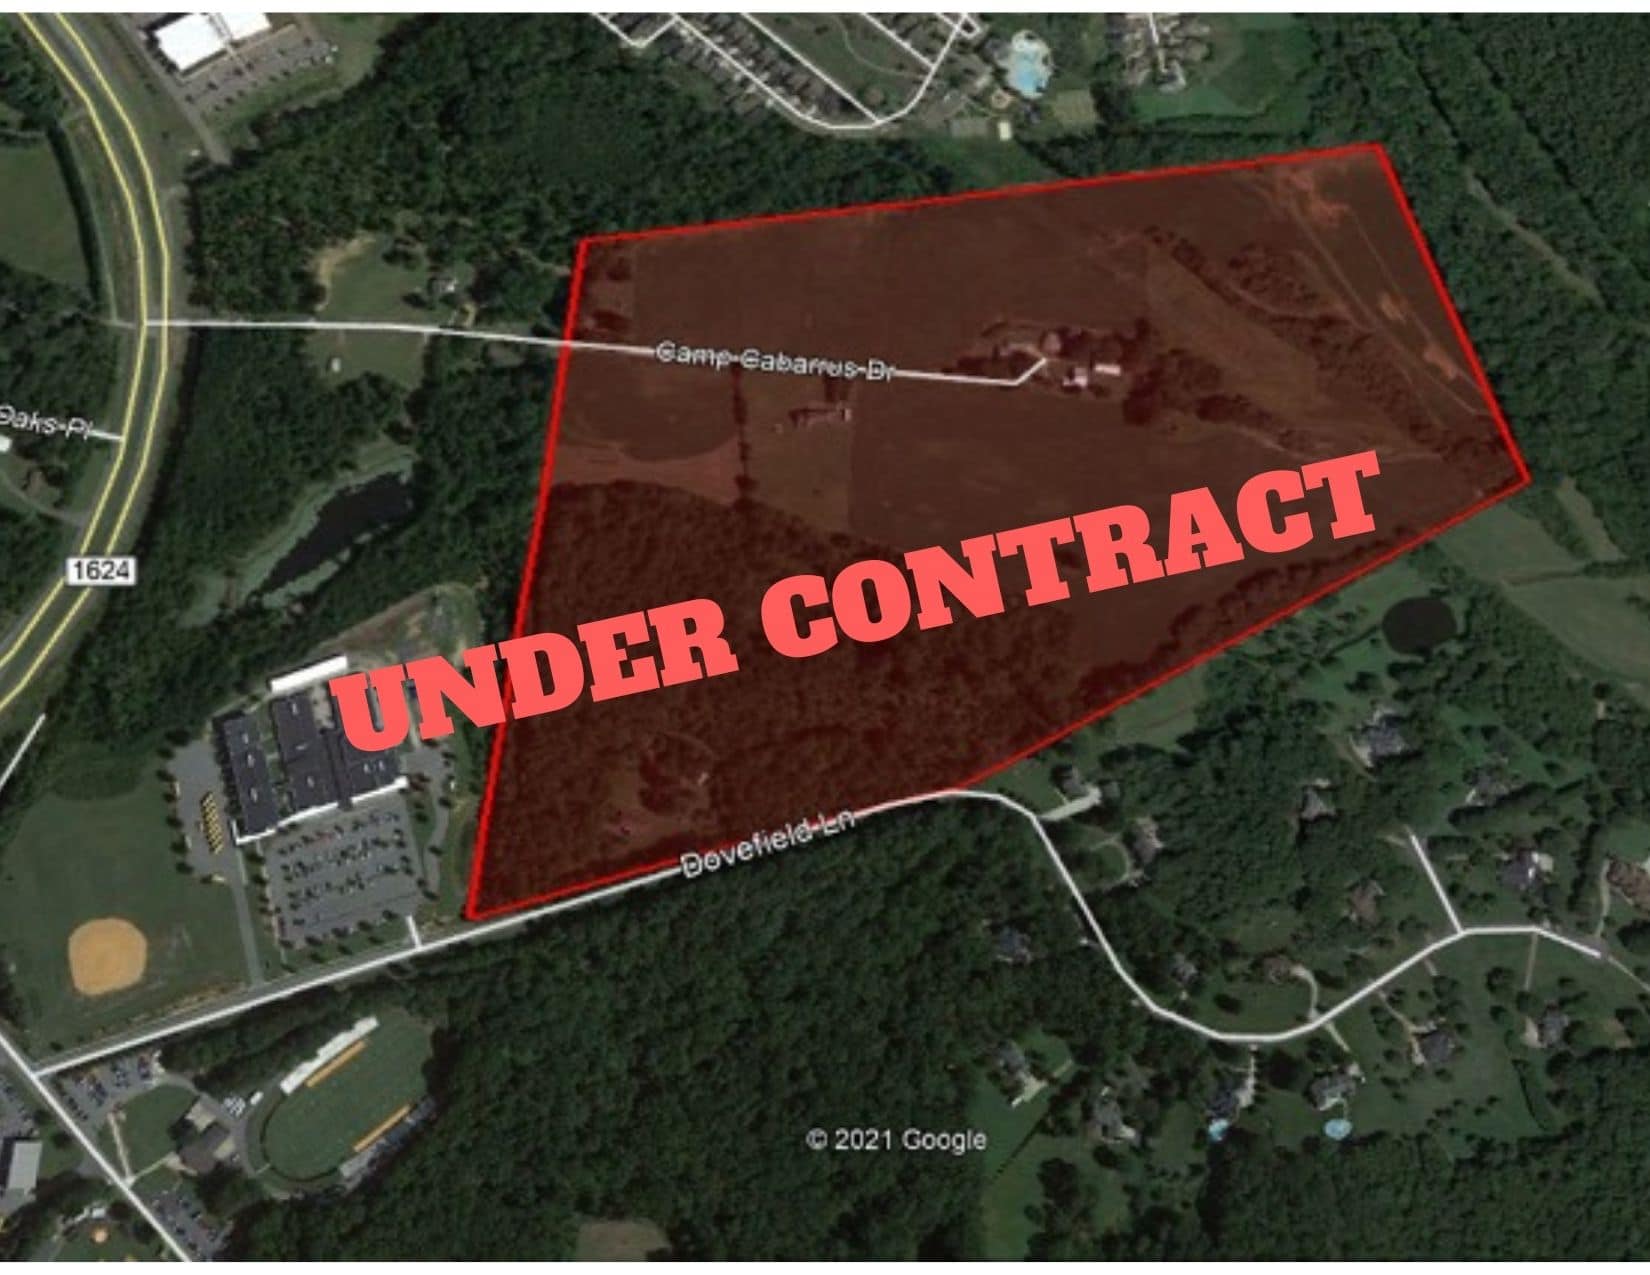 Camp Cabarrus - UNDER CONTRACT